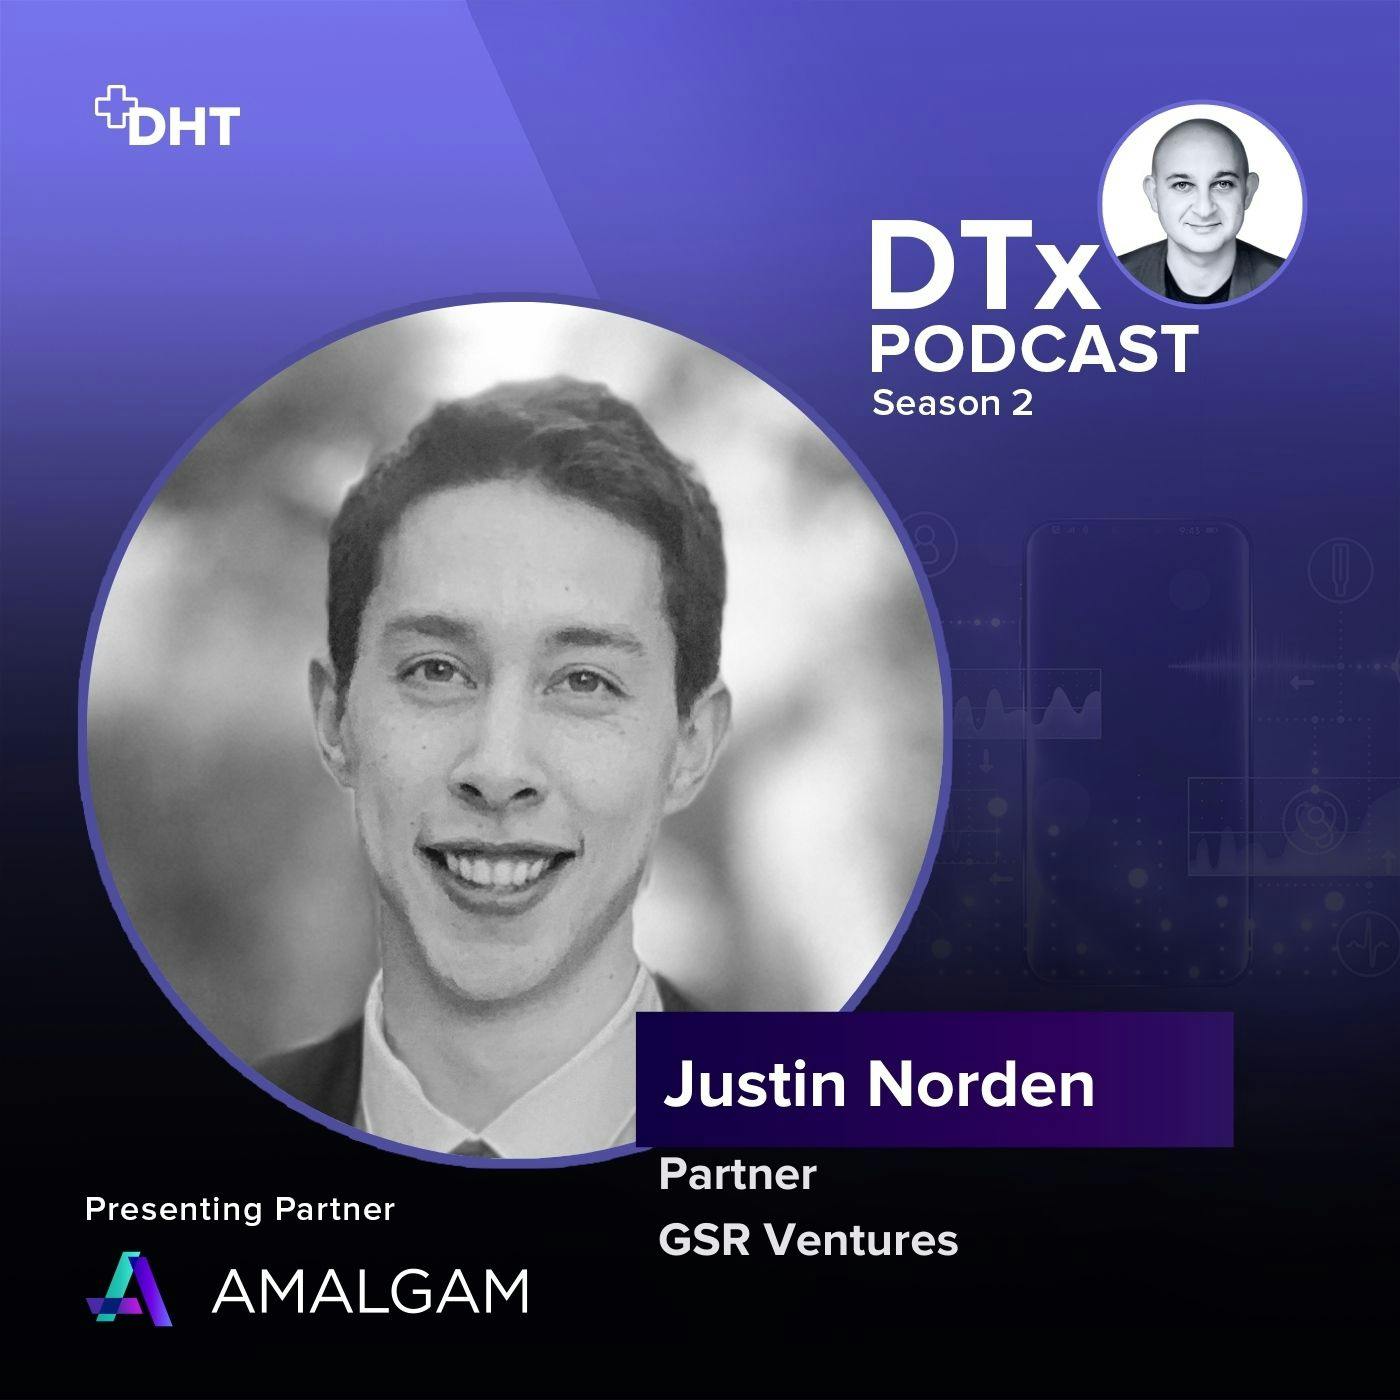 Investing in Digital Health: Justin Norden Shares Insights Into Succeeding in DTx